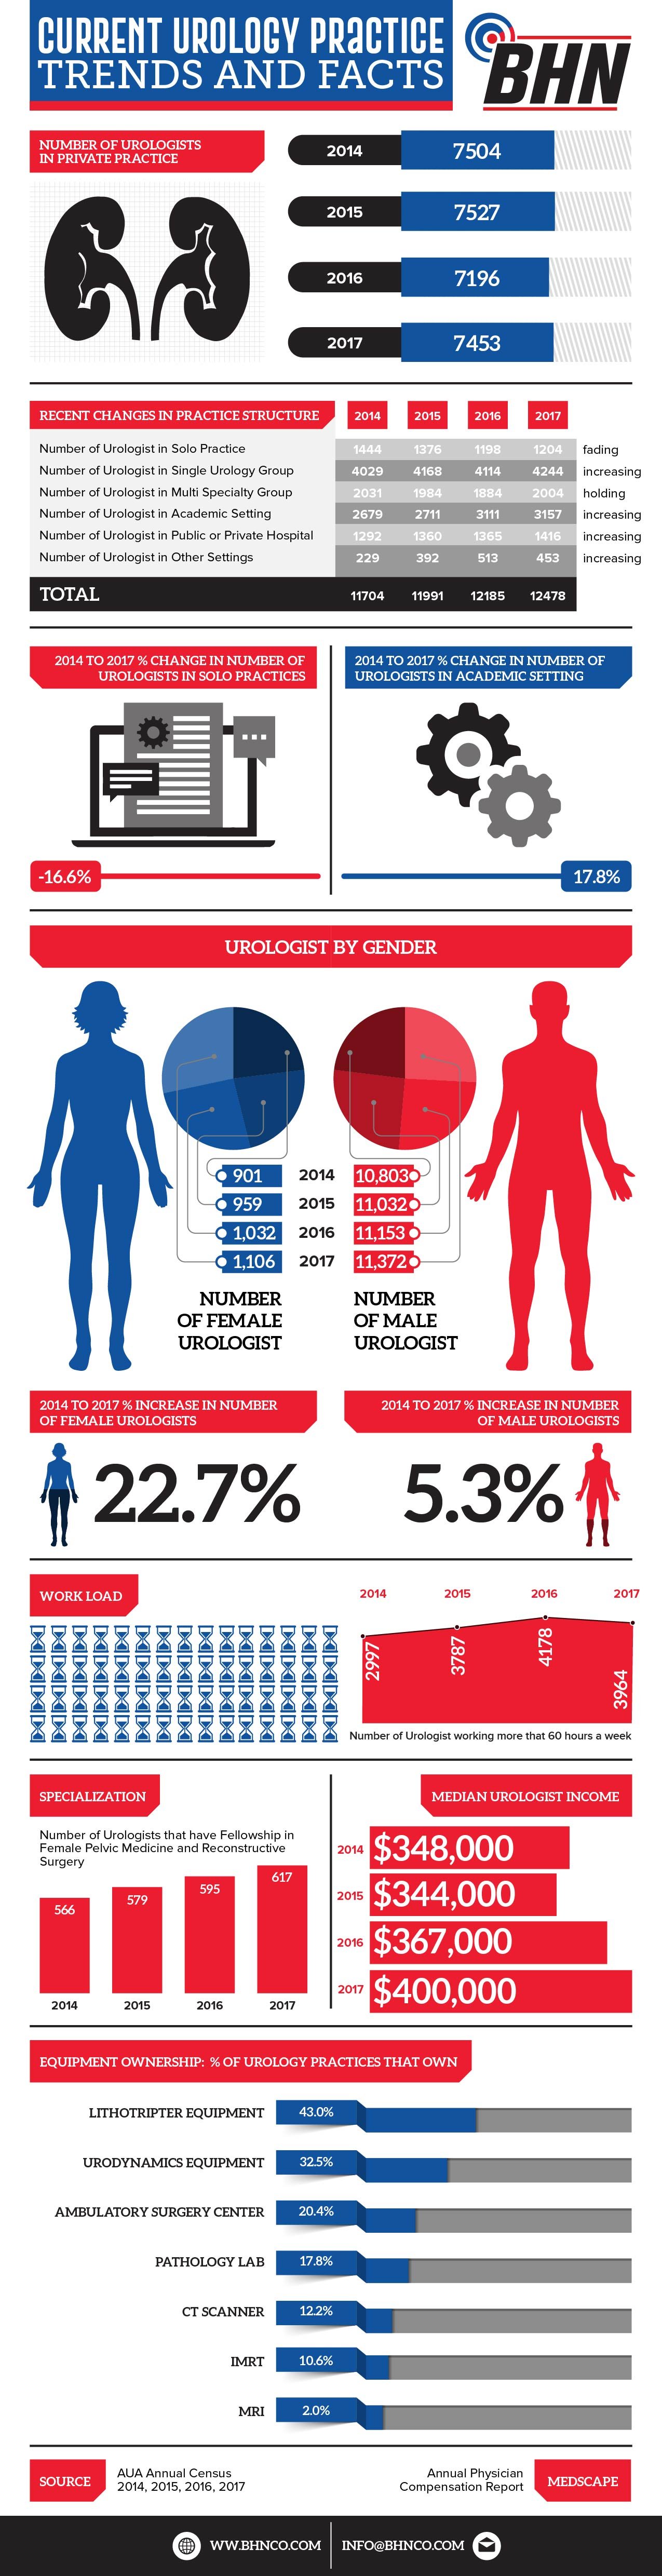 BHN-Urology-InfoGraphic-Trends-Facts